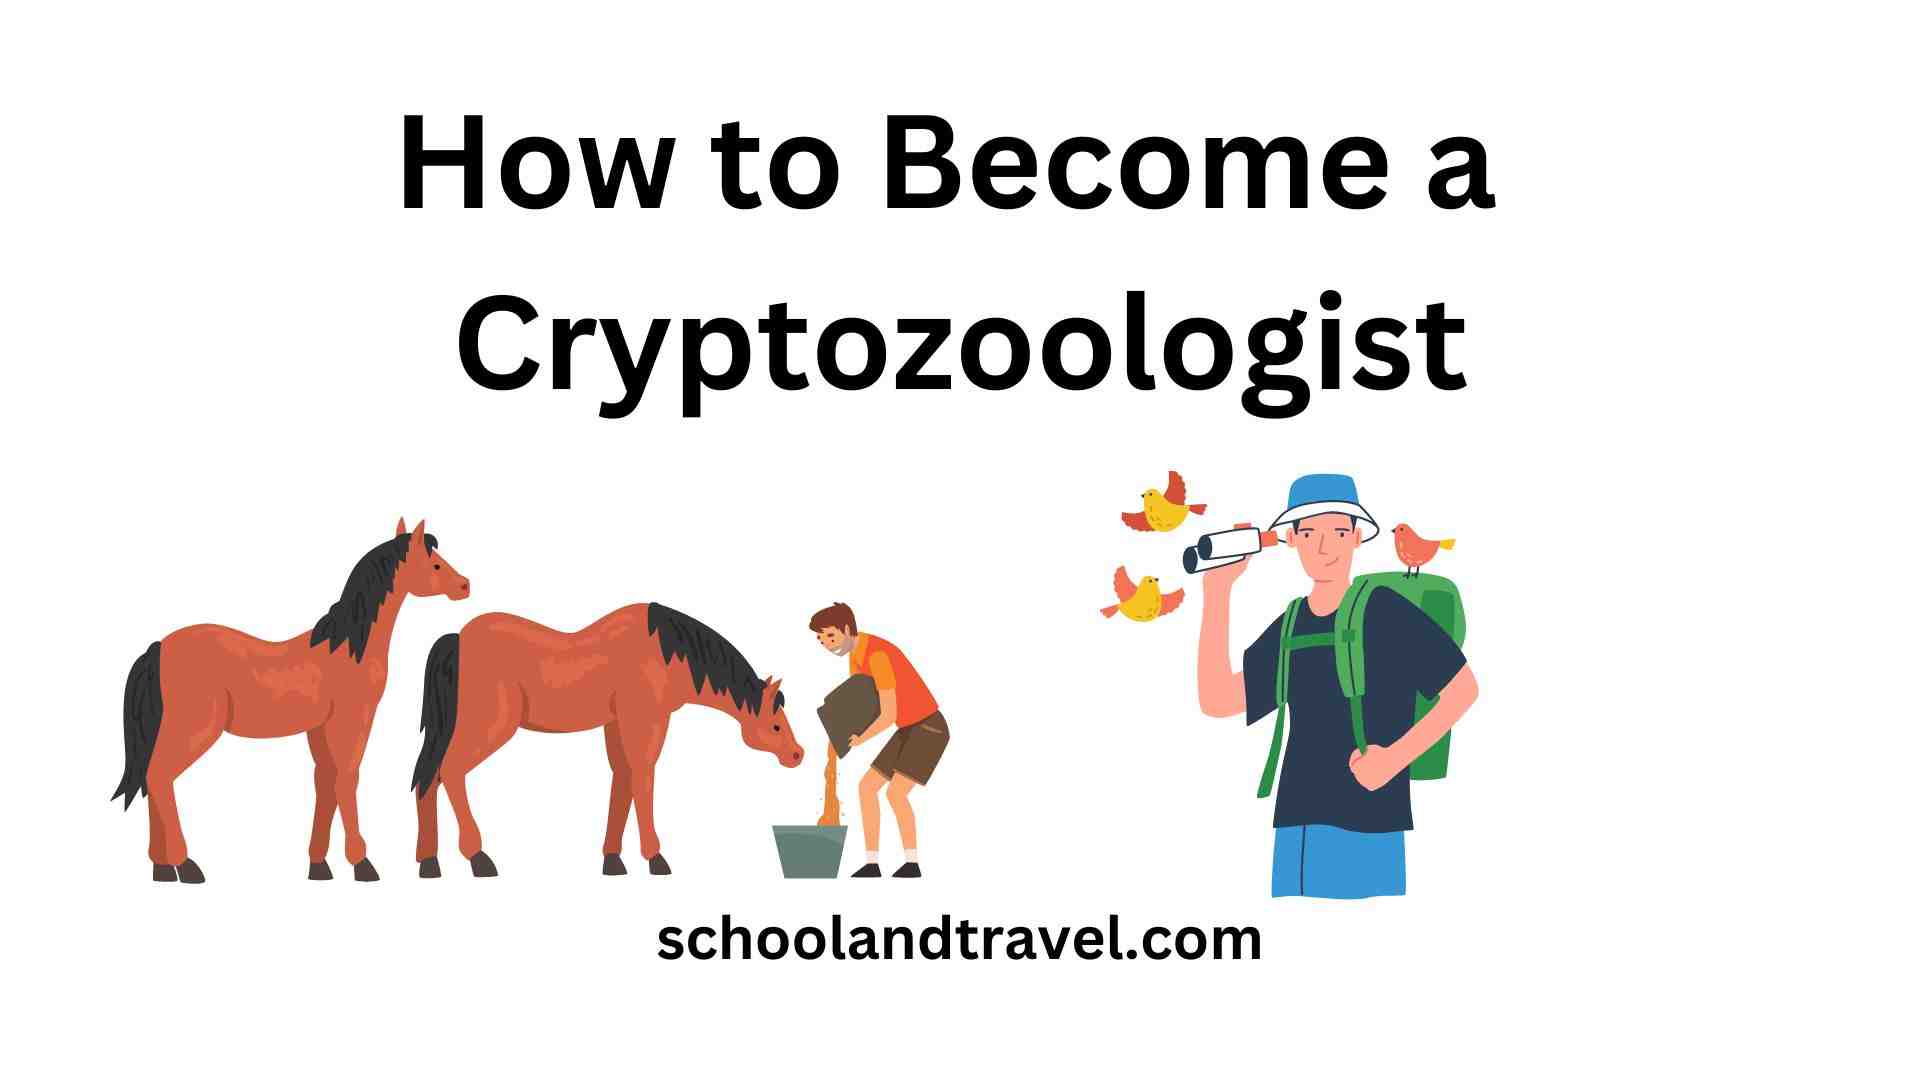 How to Become a Cryptozoologist